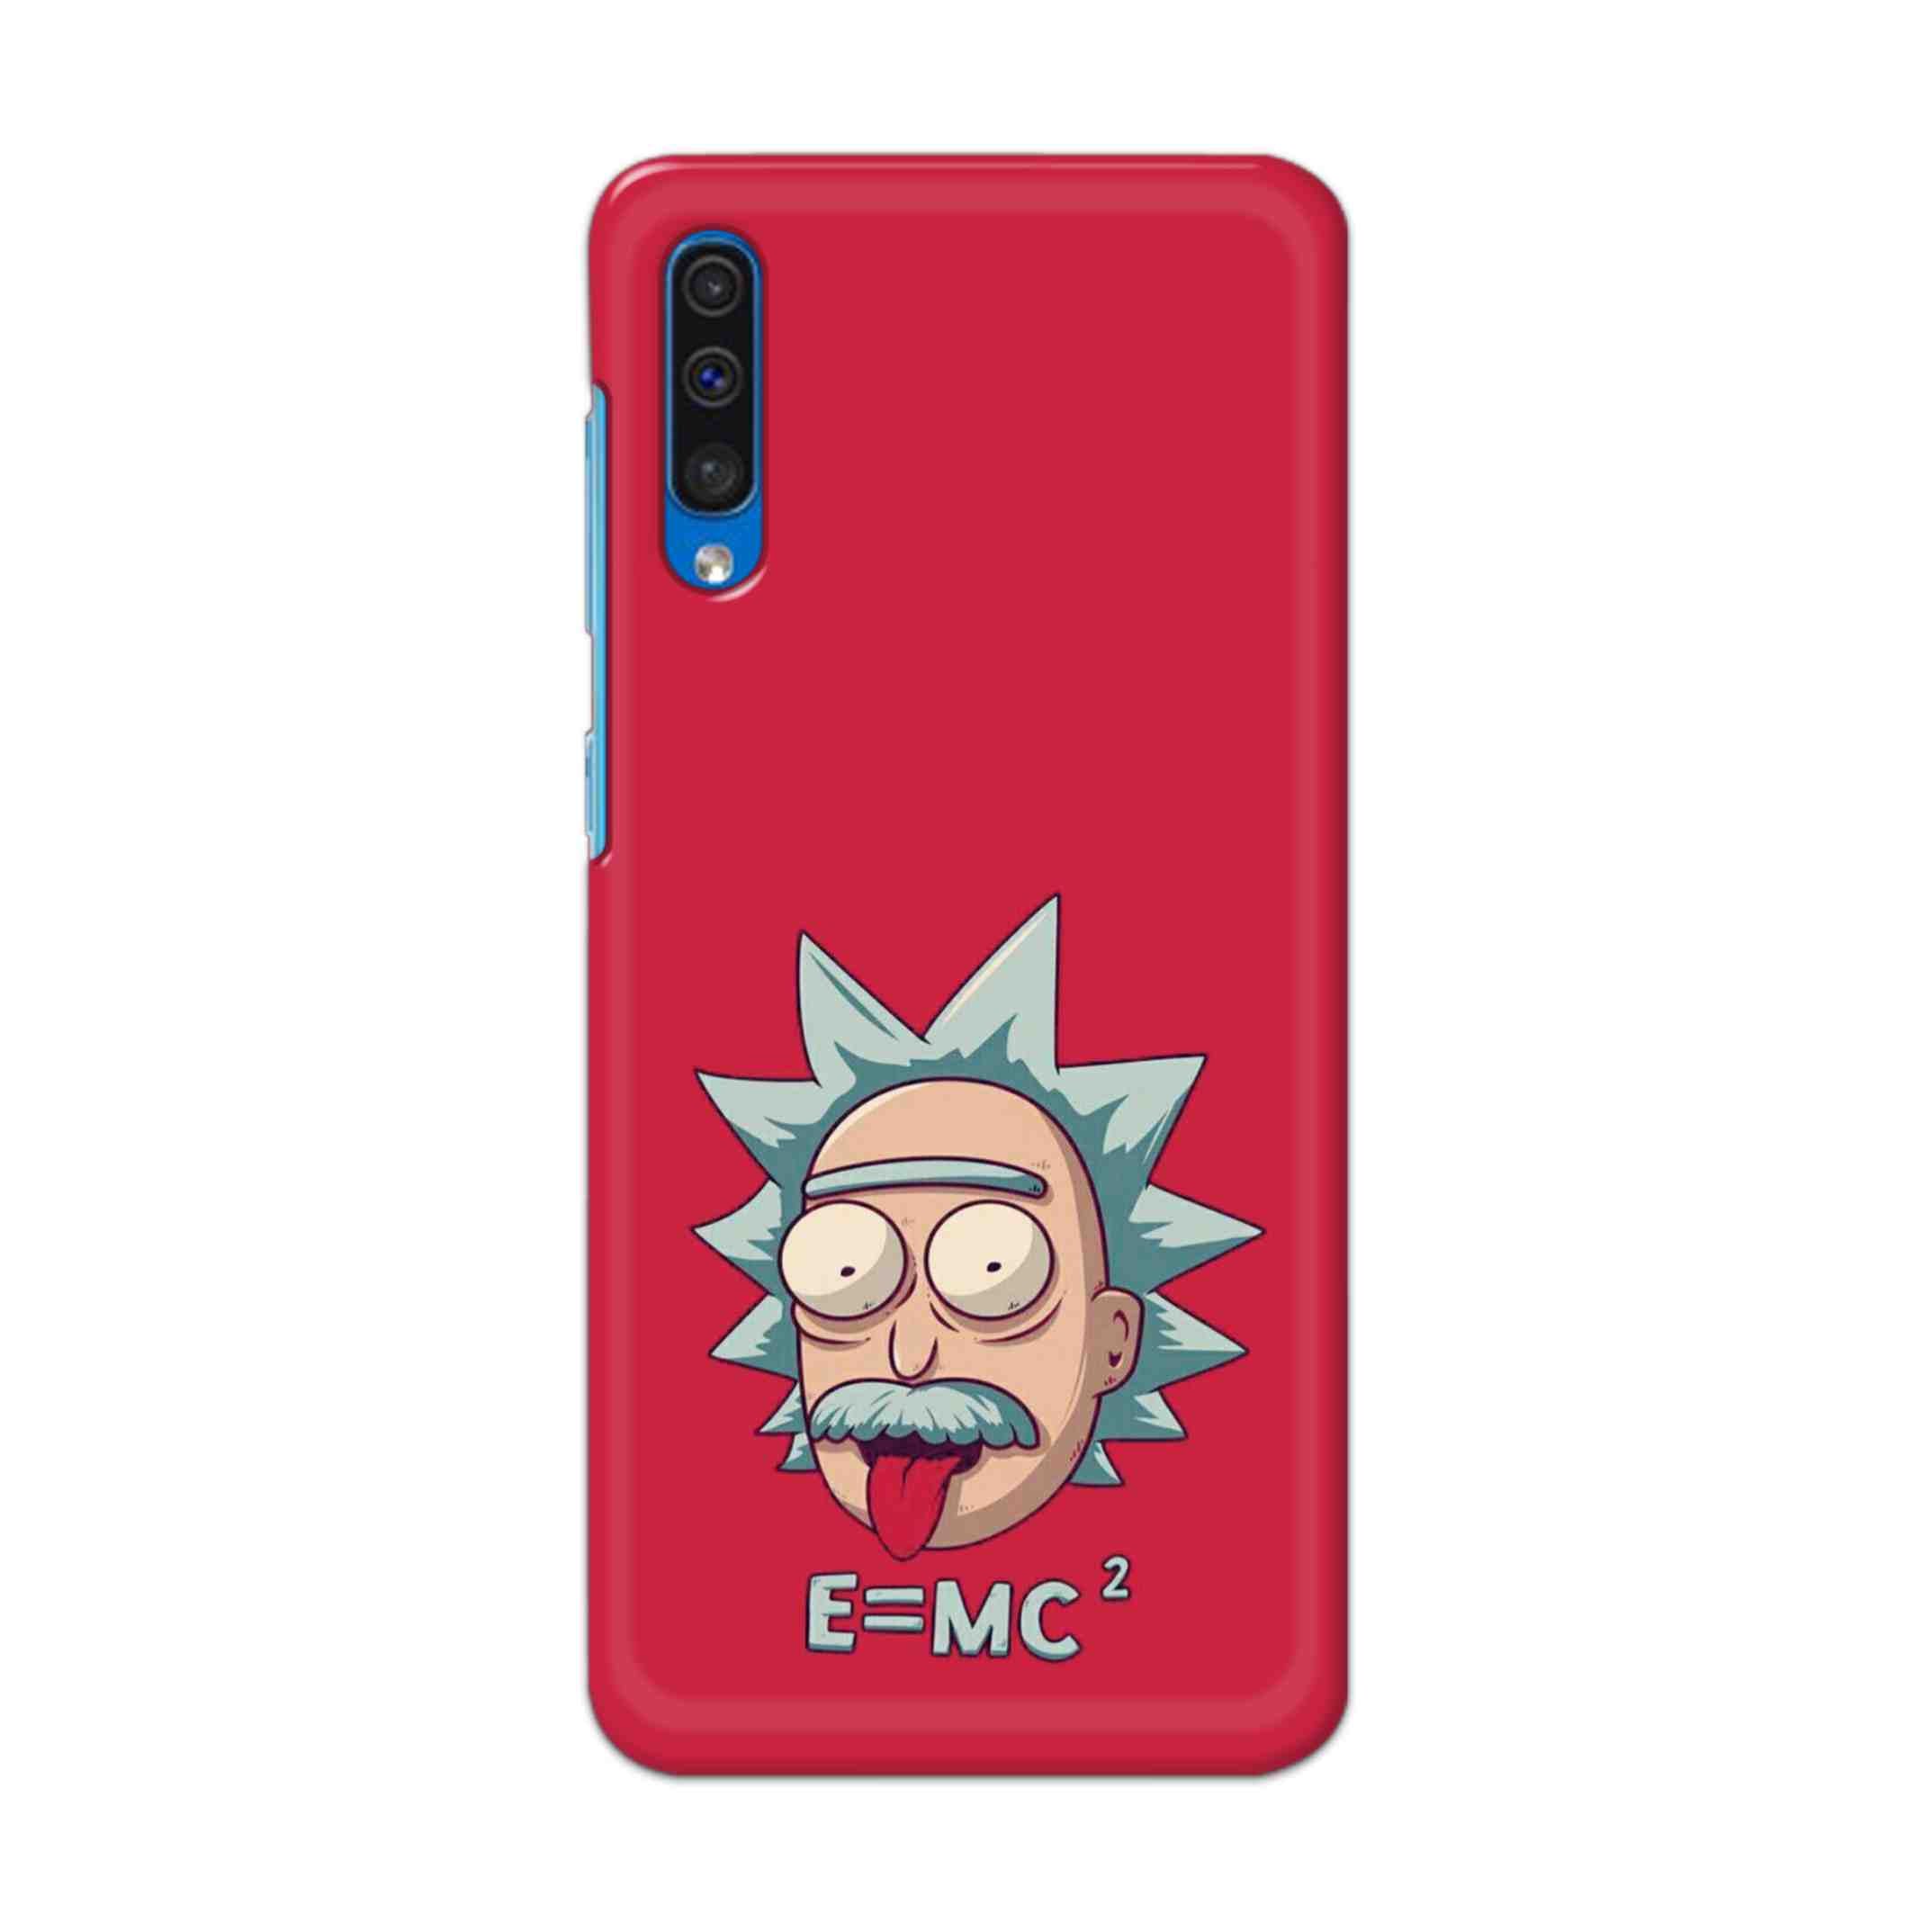 Buy E=Mc Hard Back Mobile Phone Case Cover For Samsung Galaxy A50 / A50s / A30s Online